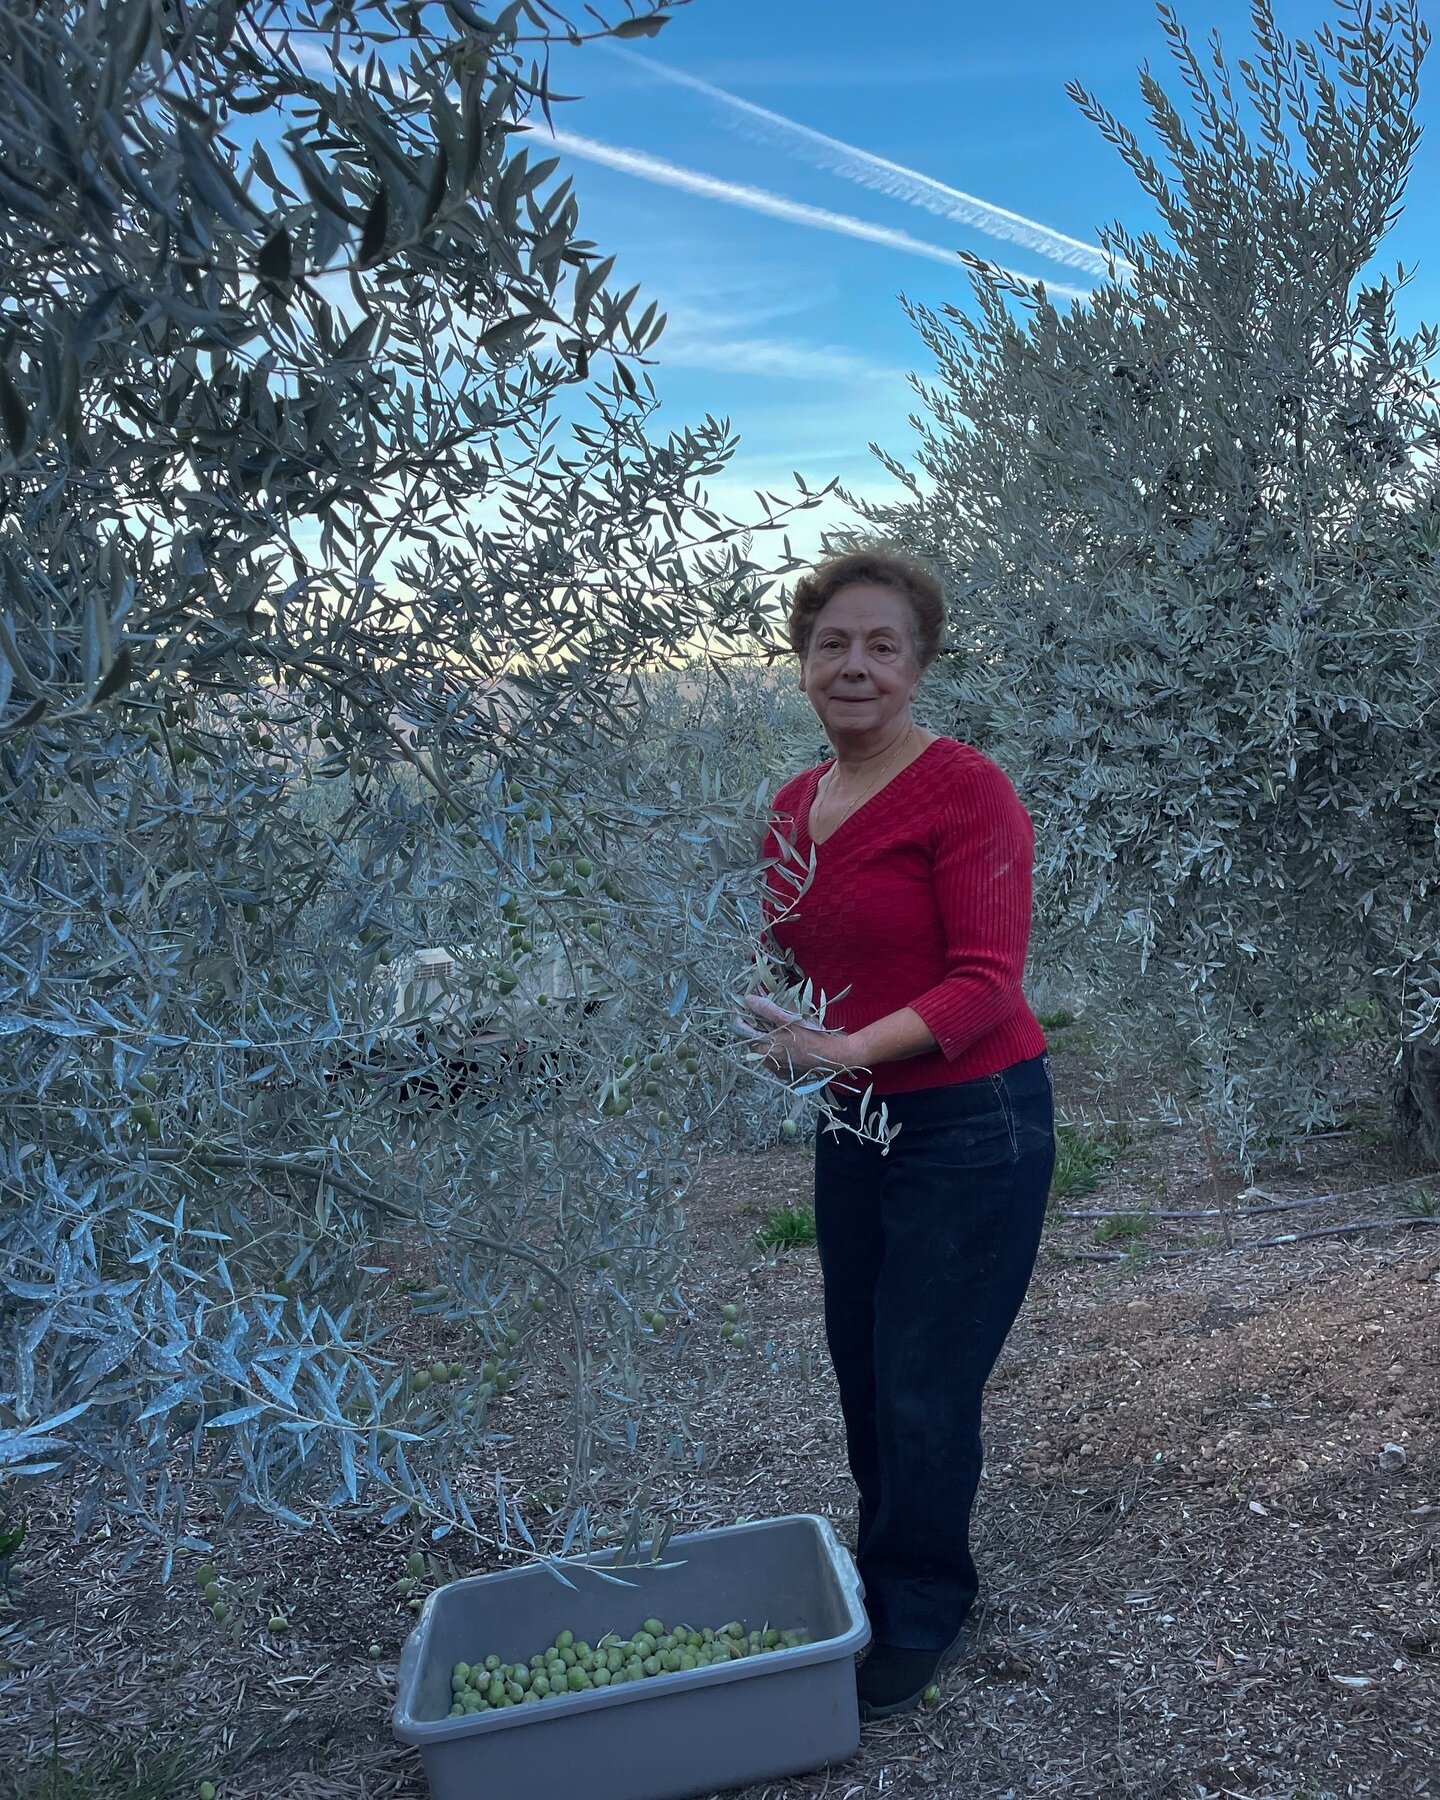 Mama Saca hard at work picking olives all day before cooking a delicious post-harvest dinner